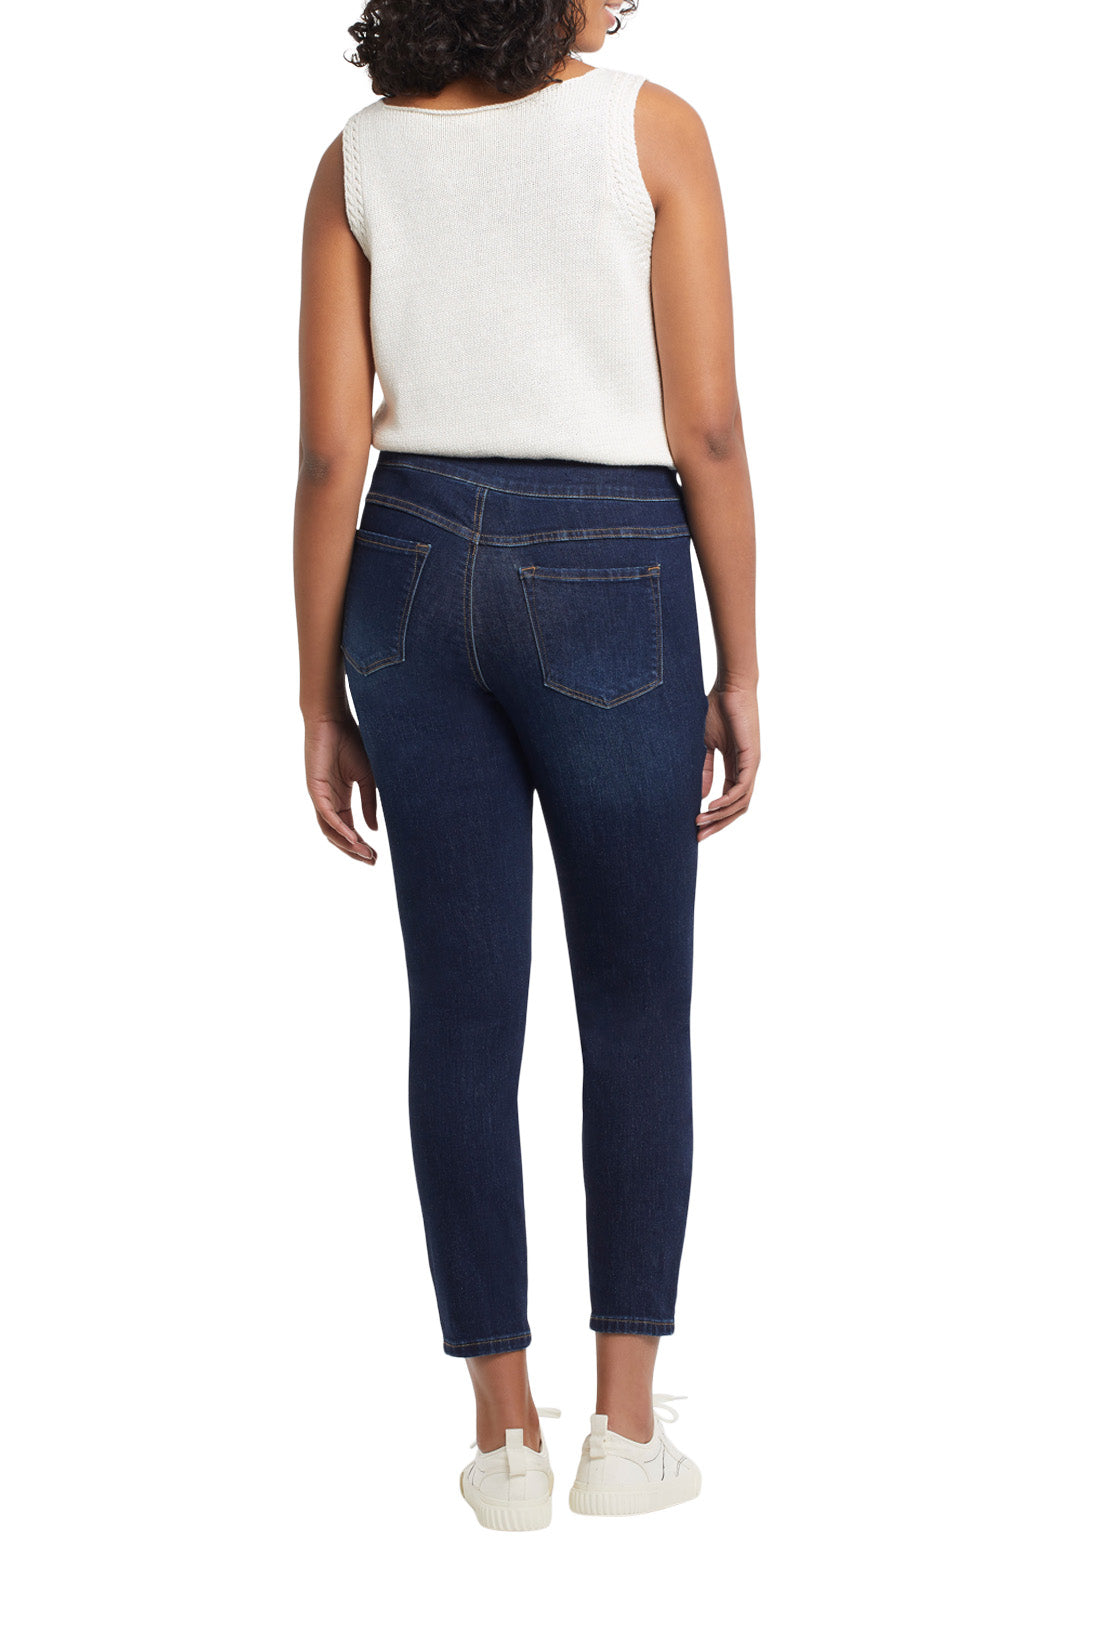 Tribal Audrey Pull-on Jegging -Dream Jean